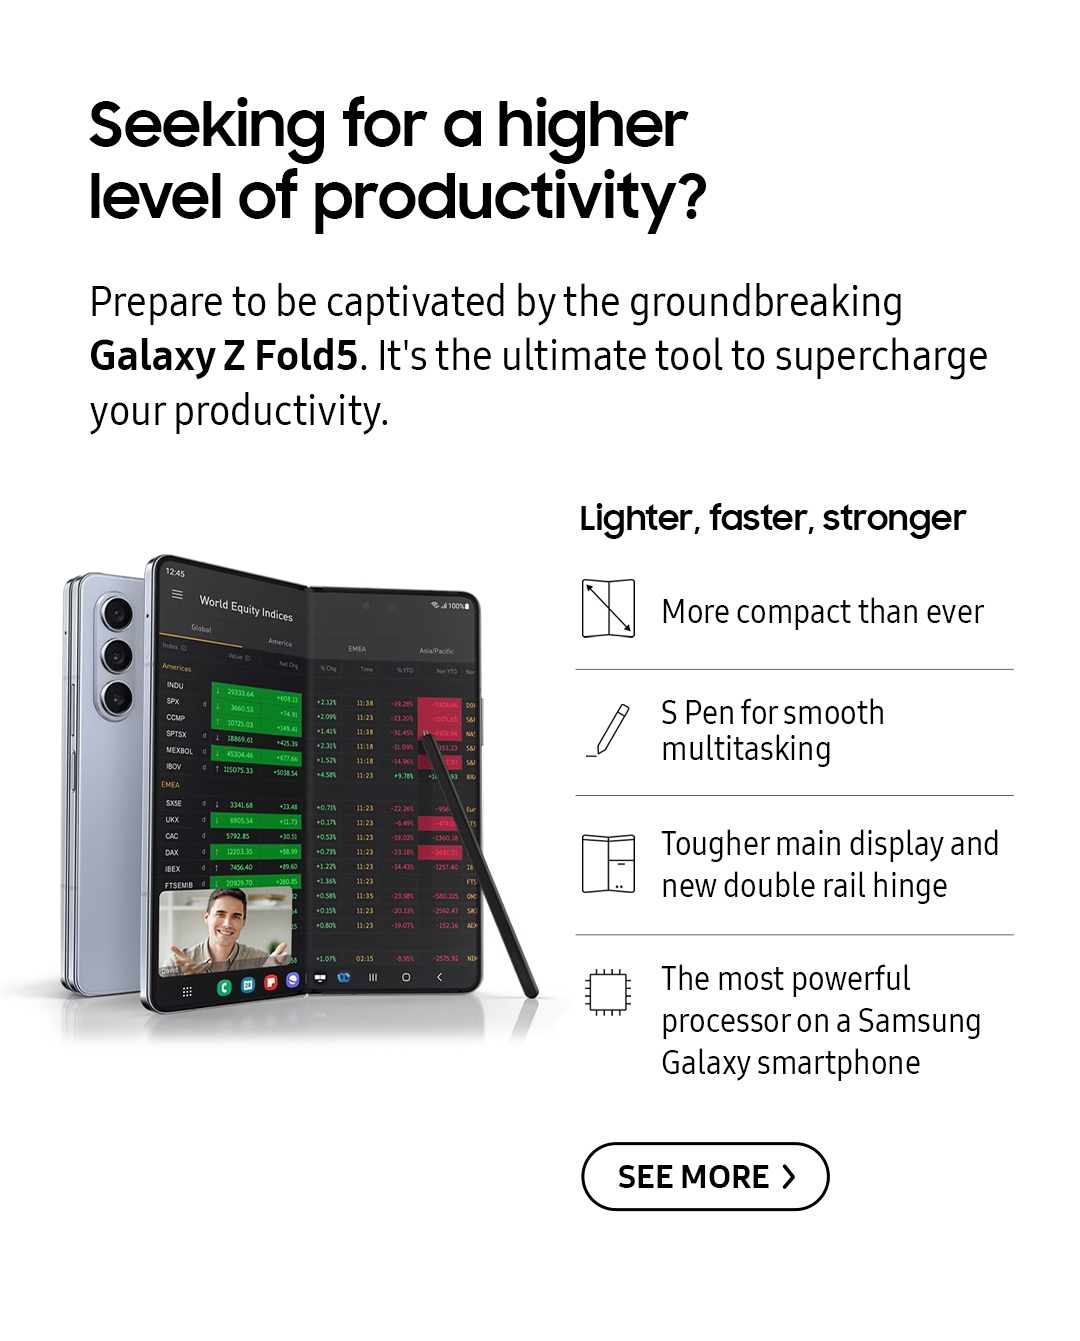 Seeking for a higher level of productivity? Prepare to be captivated by the groundbreaking Galaxy Z Fold5. It's the ultimate tool to supercharge your productivity. Click here to see more!